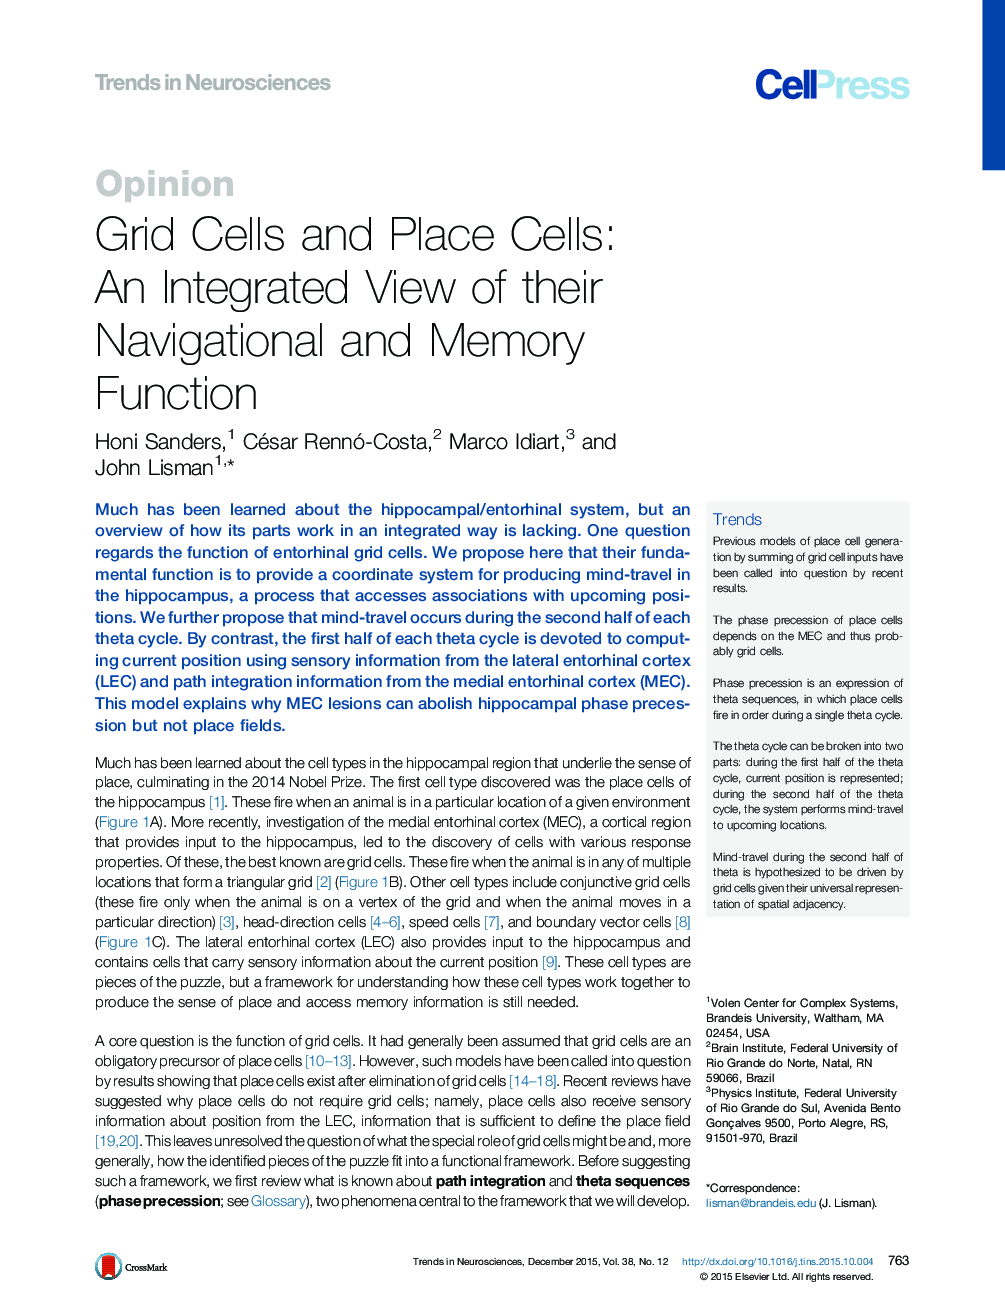 Grid Cells and Place Cells: An Integrated View of their Navigational and Memory Function